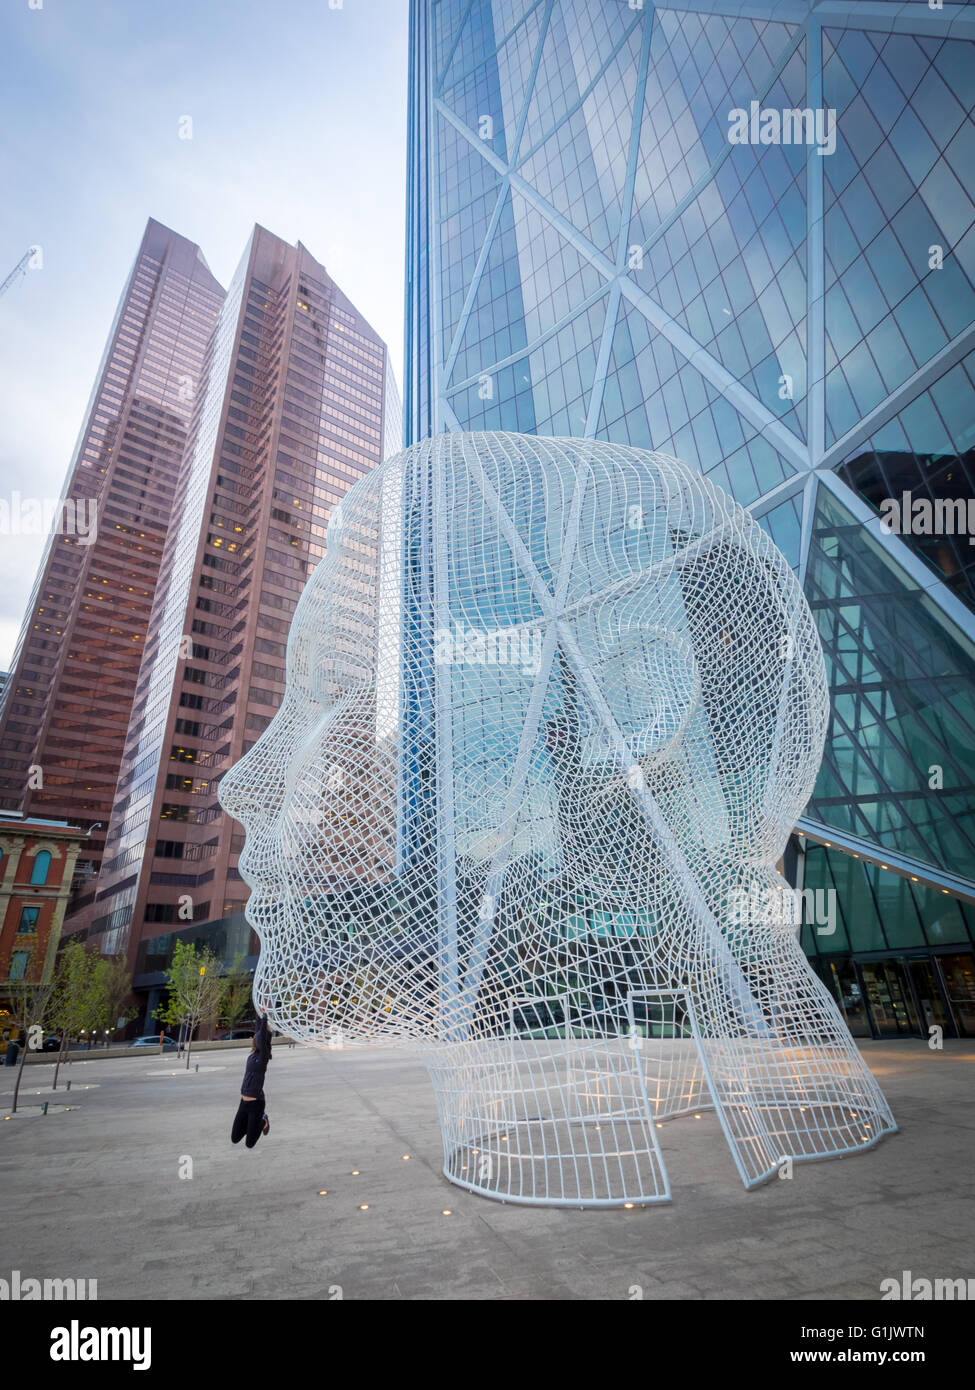 A view of the sculpture Wonderland by Jaume Plensa, in front of The Bow skyscraper in Calgary, Alberta, Canada. Stock Photo